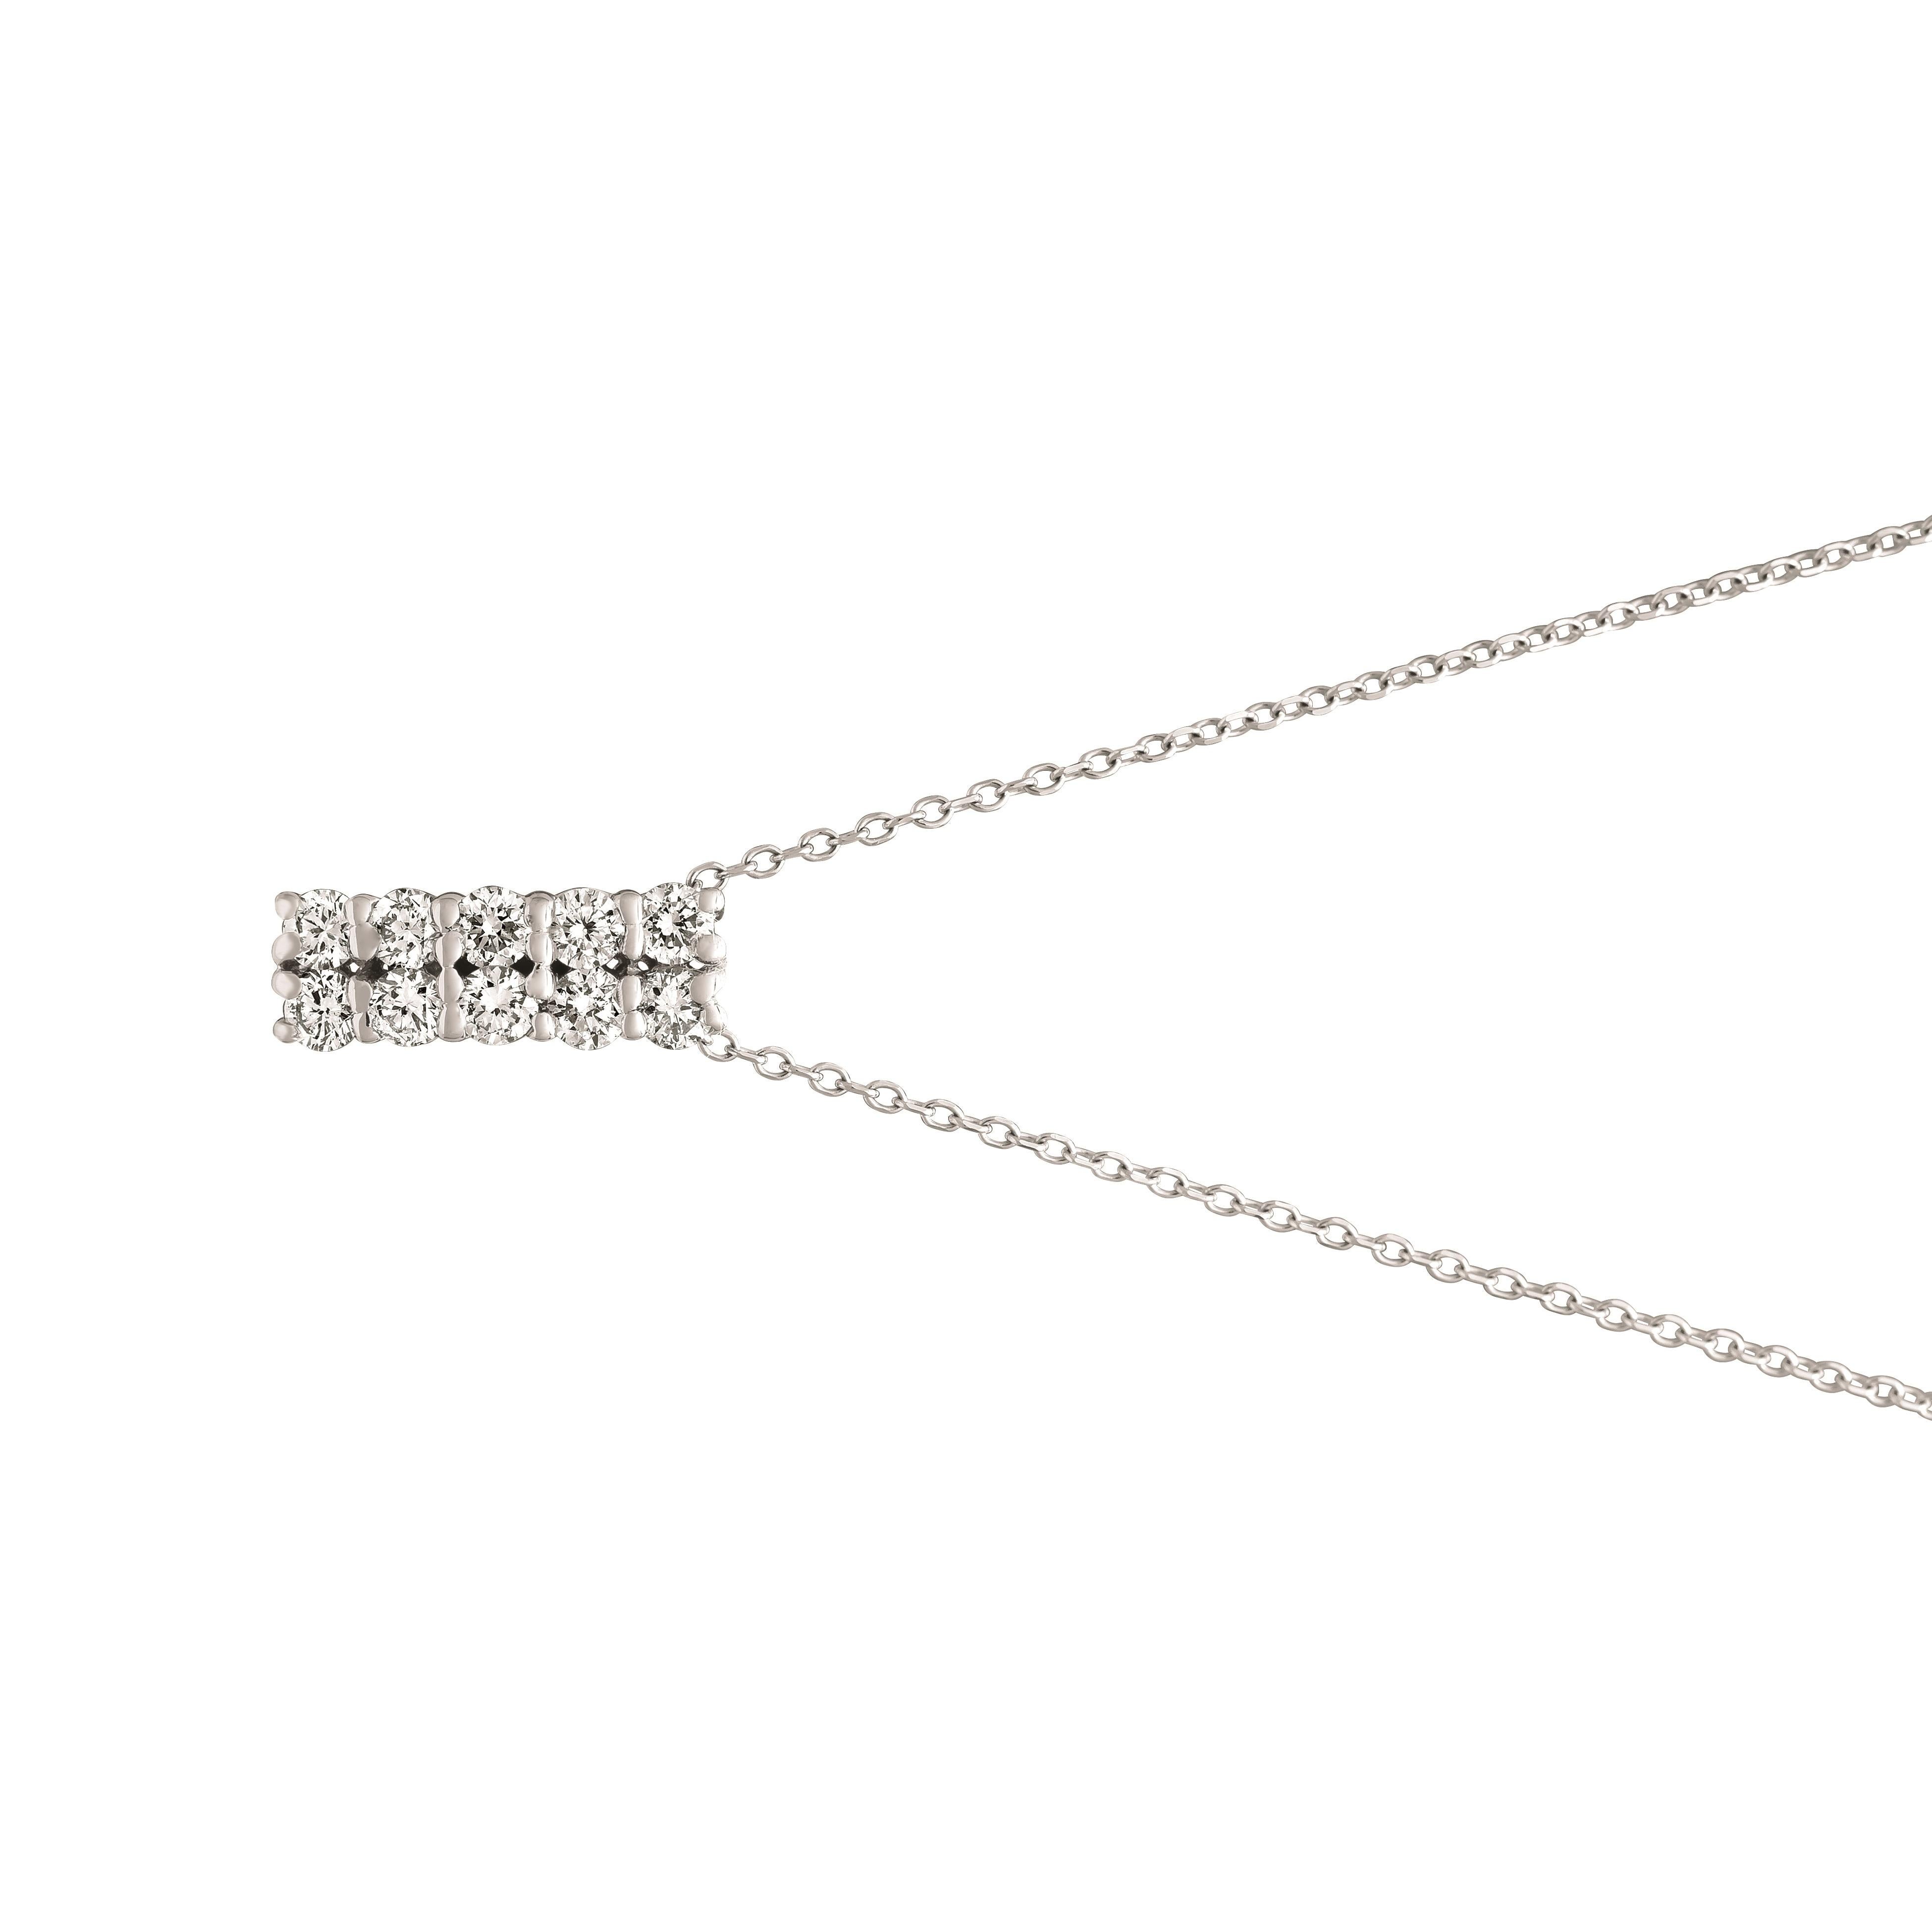 0.51 Carat Natural Diamond 2 Rows Necklace 14K White Gold G SI 18 inches chain

100% Natural Diamonds, Not Enhanced in any way Round Cut Diamond Necklace
0.51CT
G-H
SI
14K White Gold, Prong style , 2.2 grams
1/2 inch in height, 3/16 inch in width
10